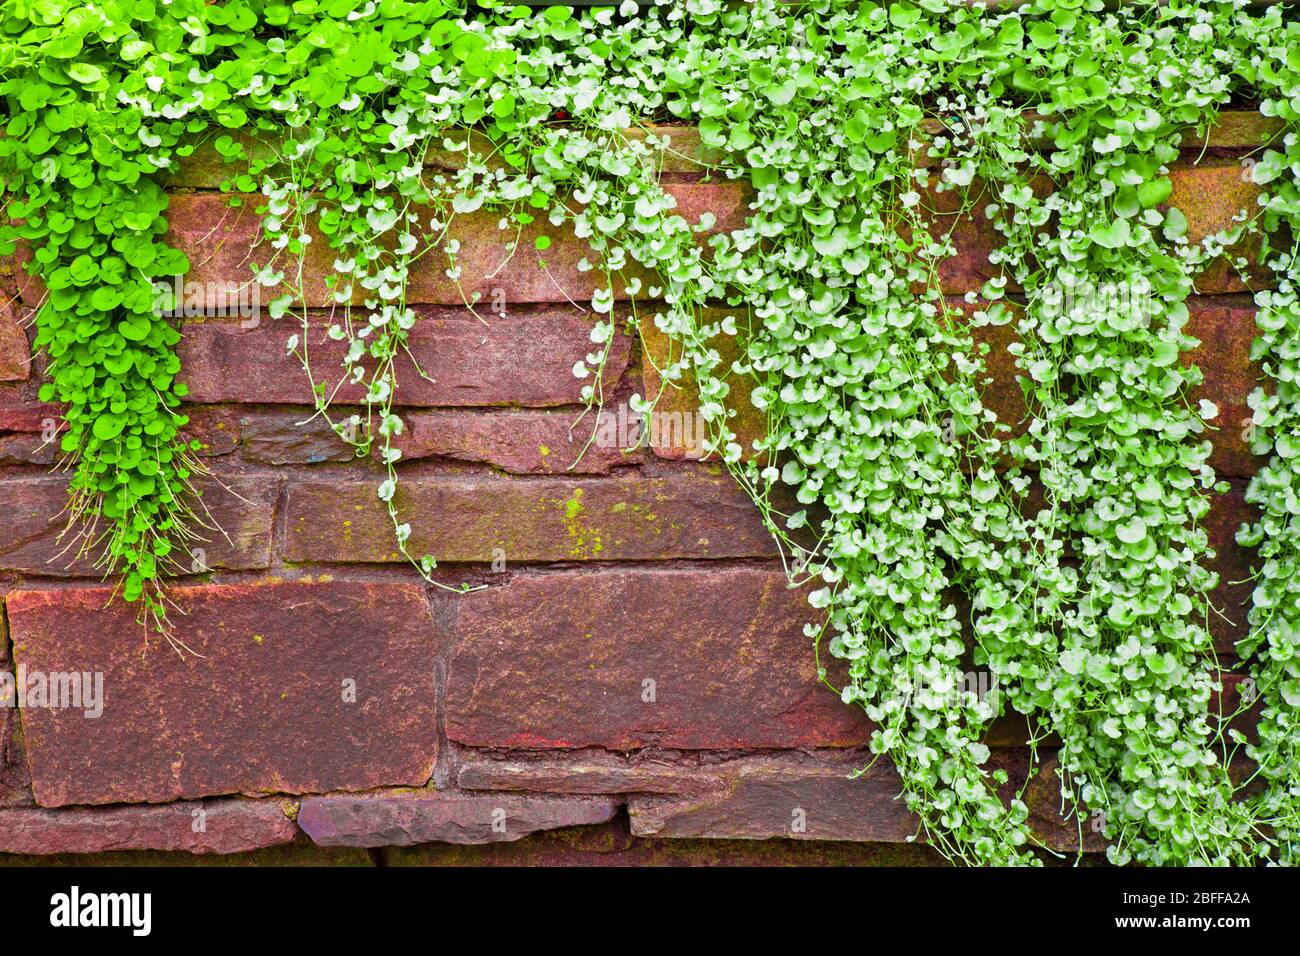 Stone wall with creeping plants Stock Photo